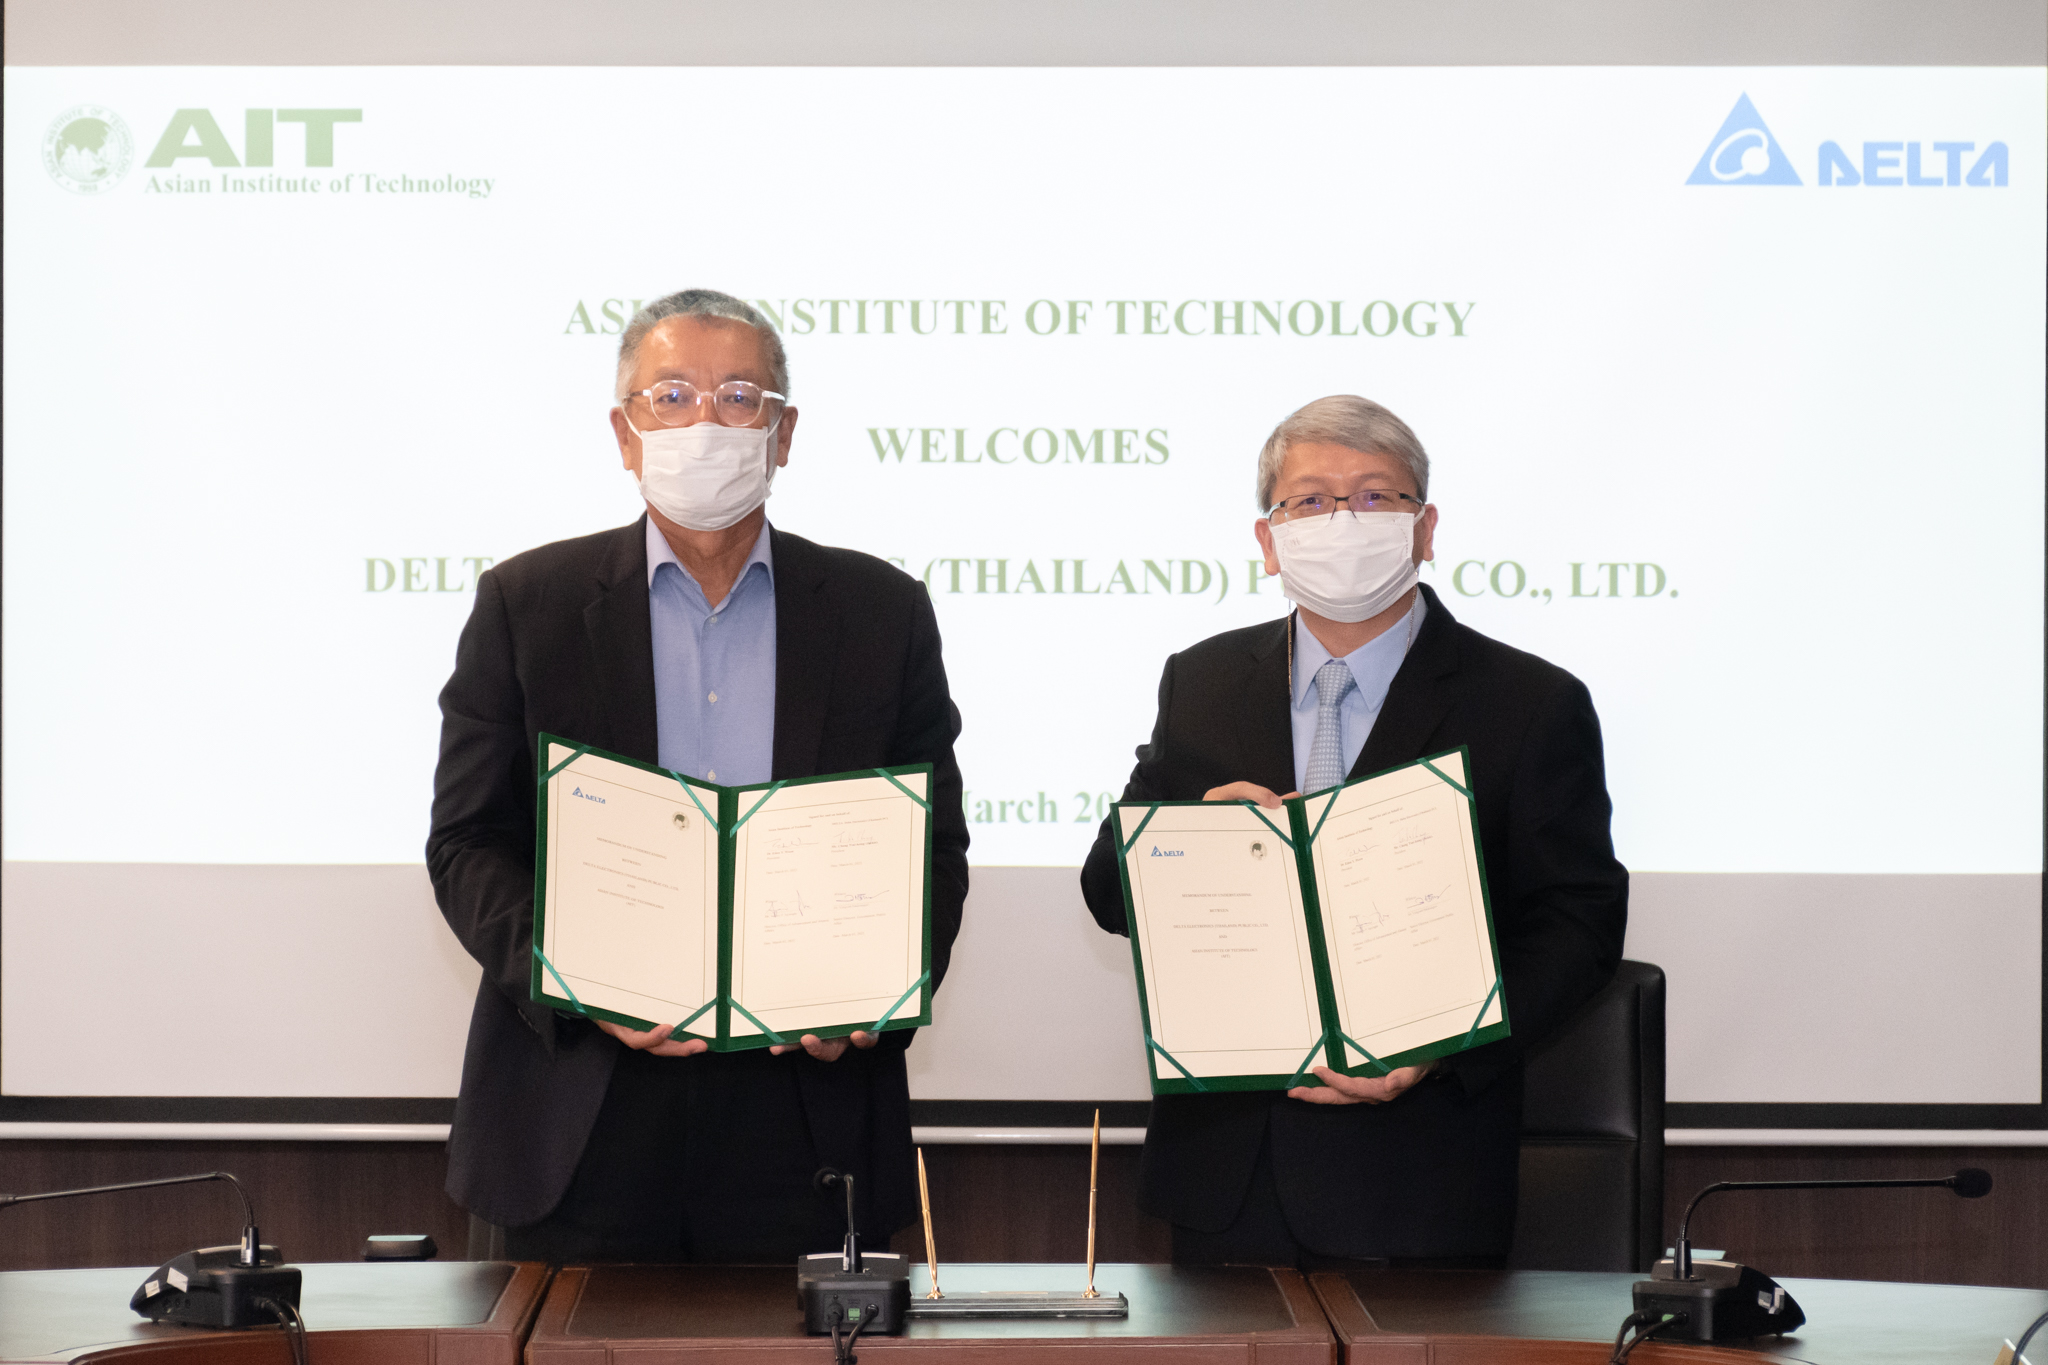 AIT and Delta Electronics (Thailand) PCL sign MoU to partner for sustainable development of the region